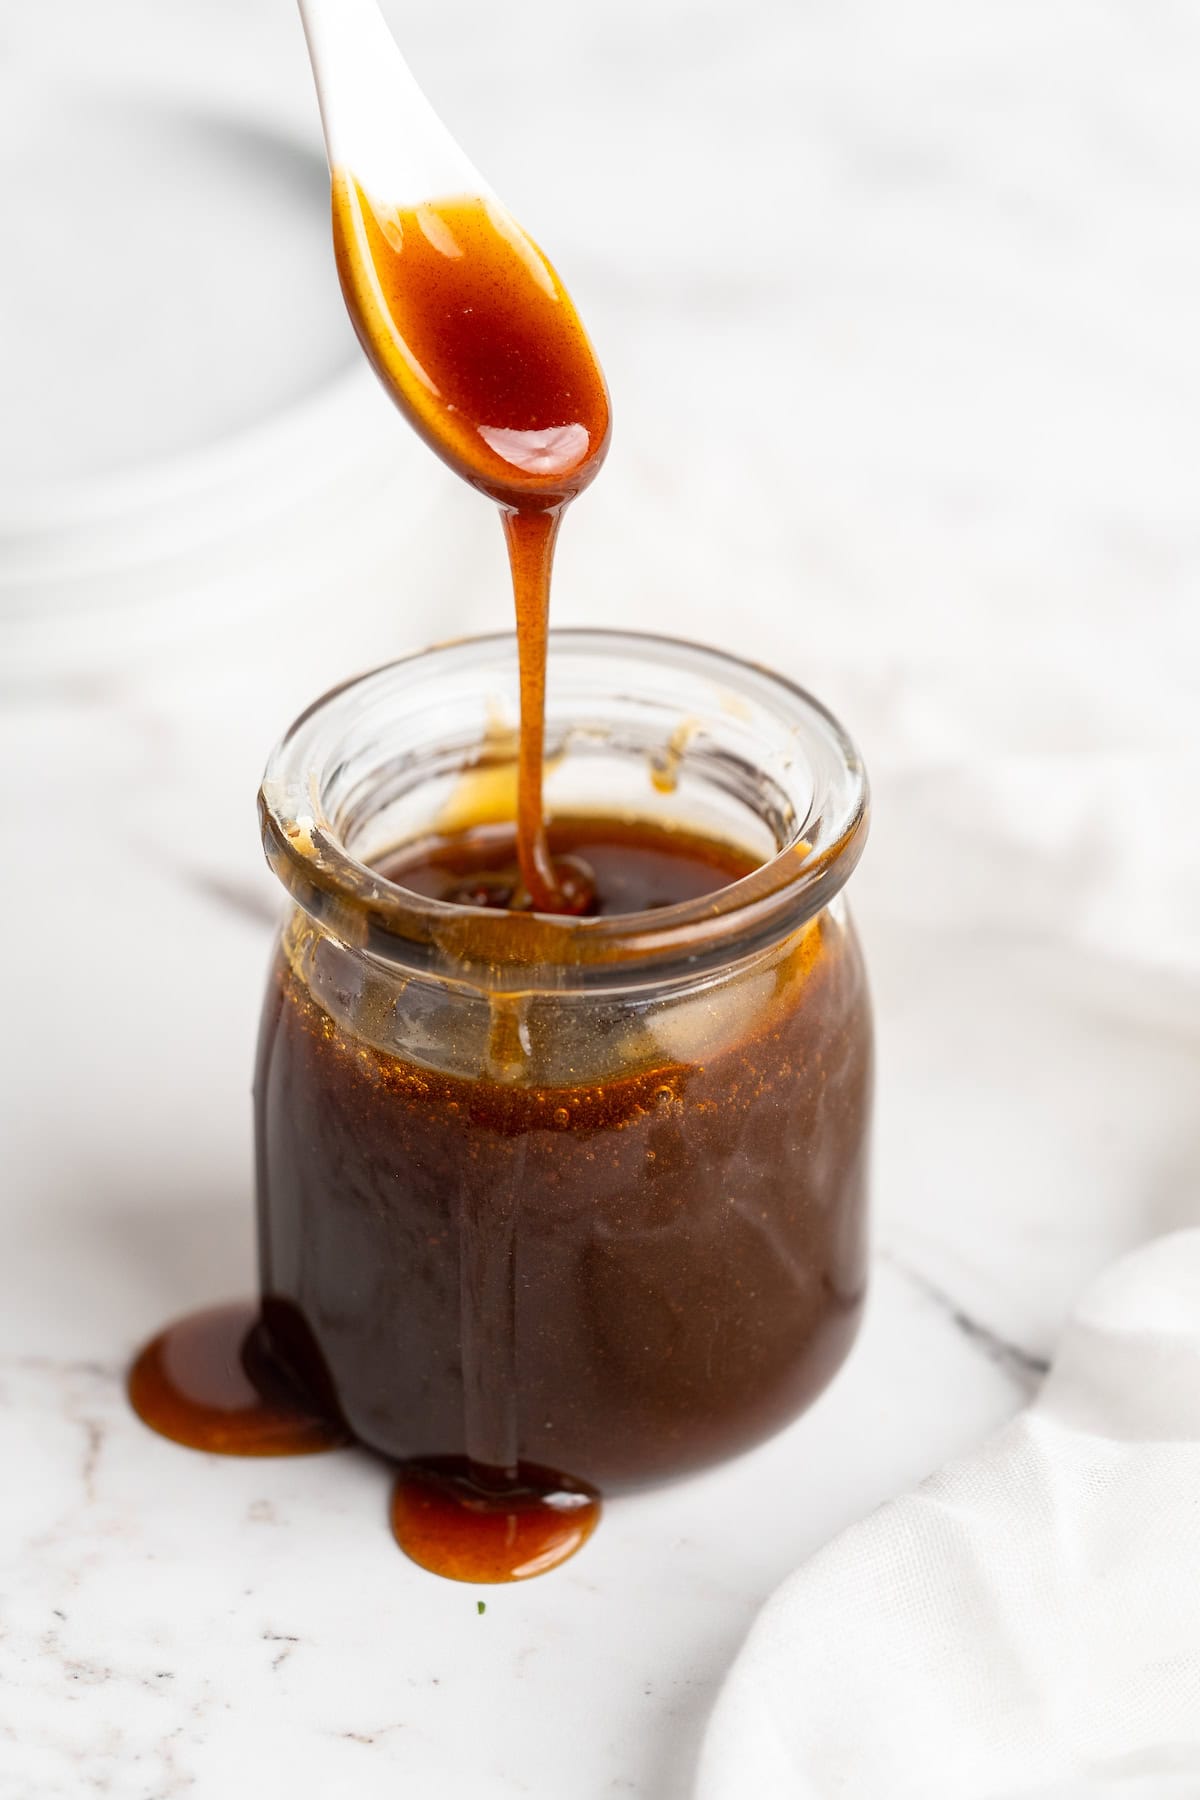 Spoon drizzling date syrup into jar